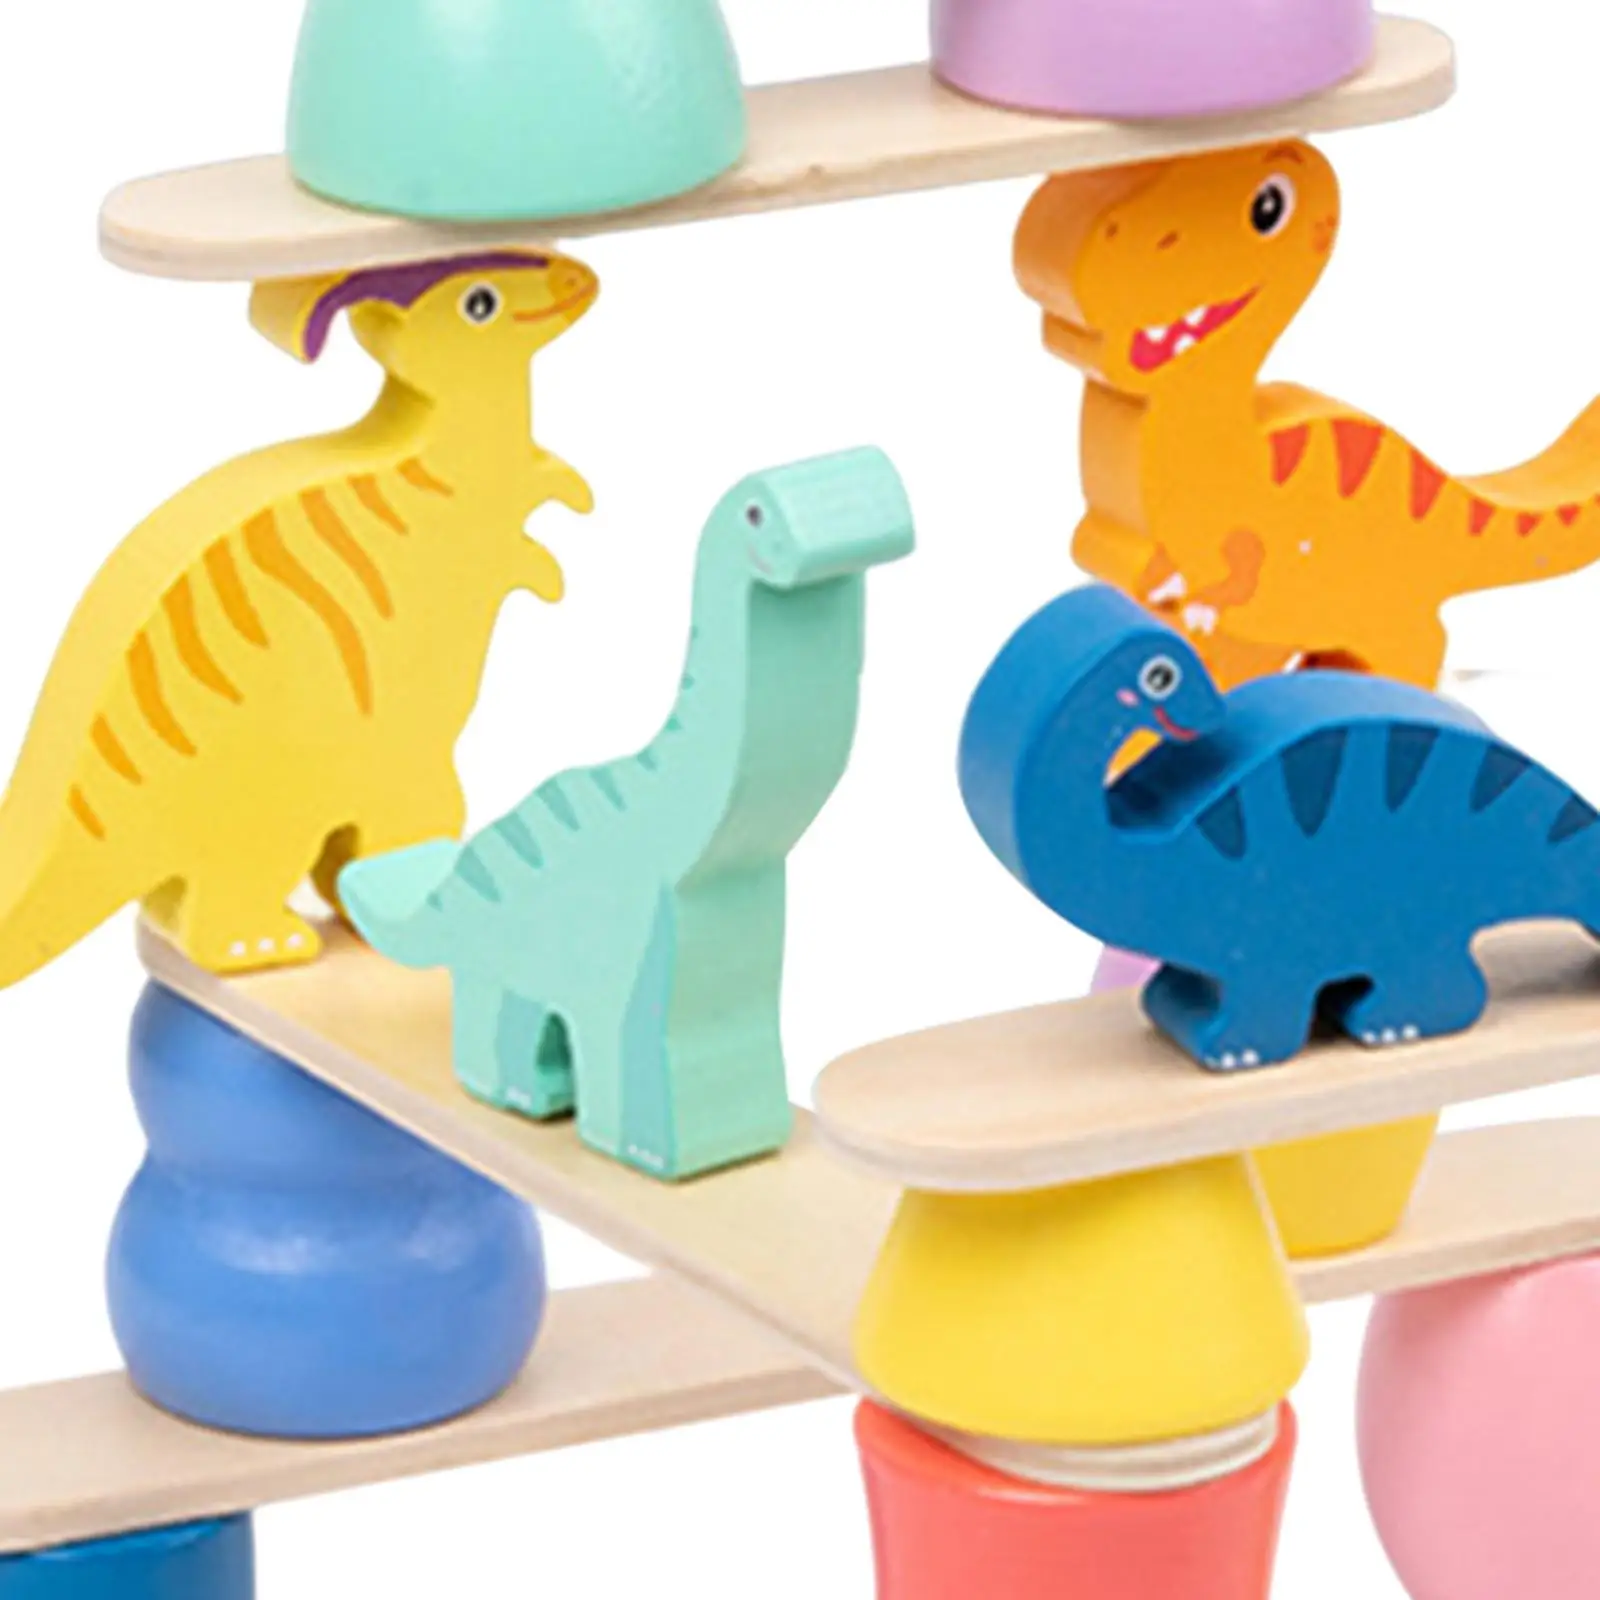 Stackable Dinosaur Toys Montessori Toys Stacking Building Blocks for 1 2 3 4 5 Year Old Babies Boys Girls Toddlers Birthday Gift